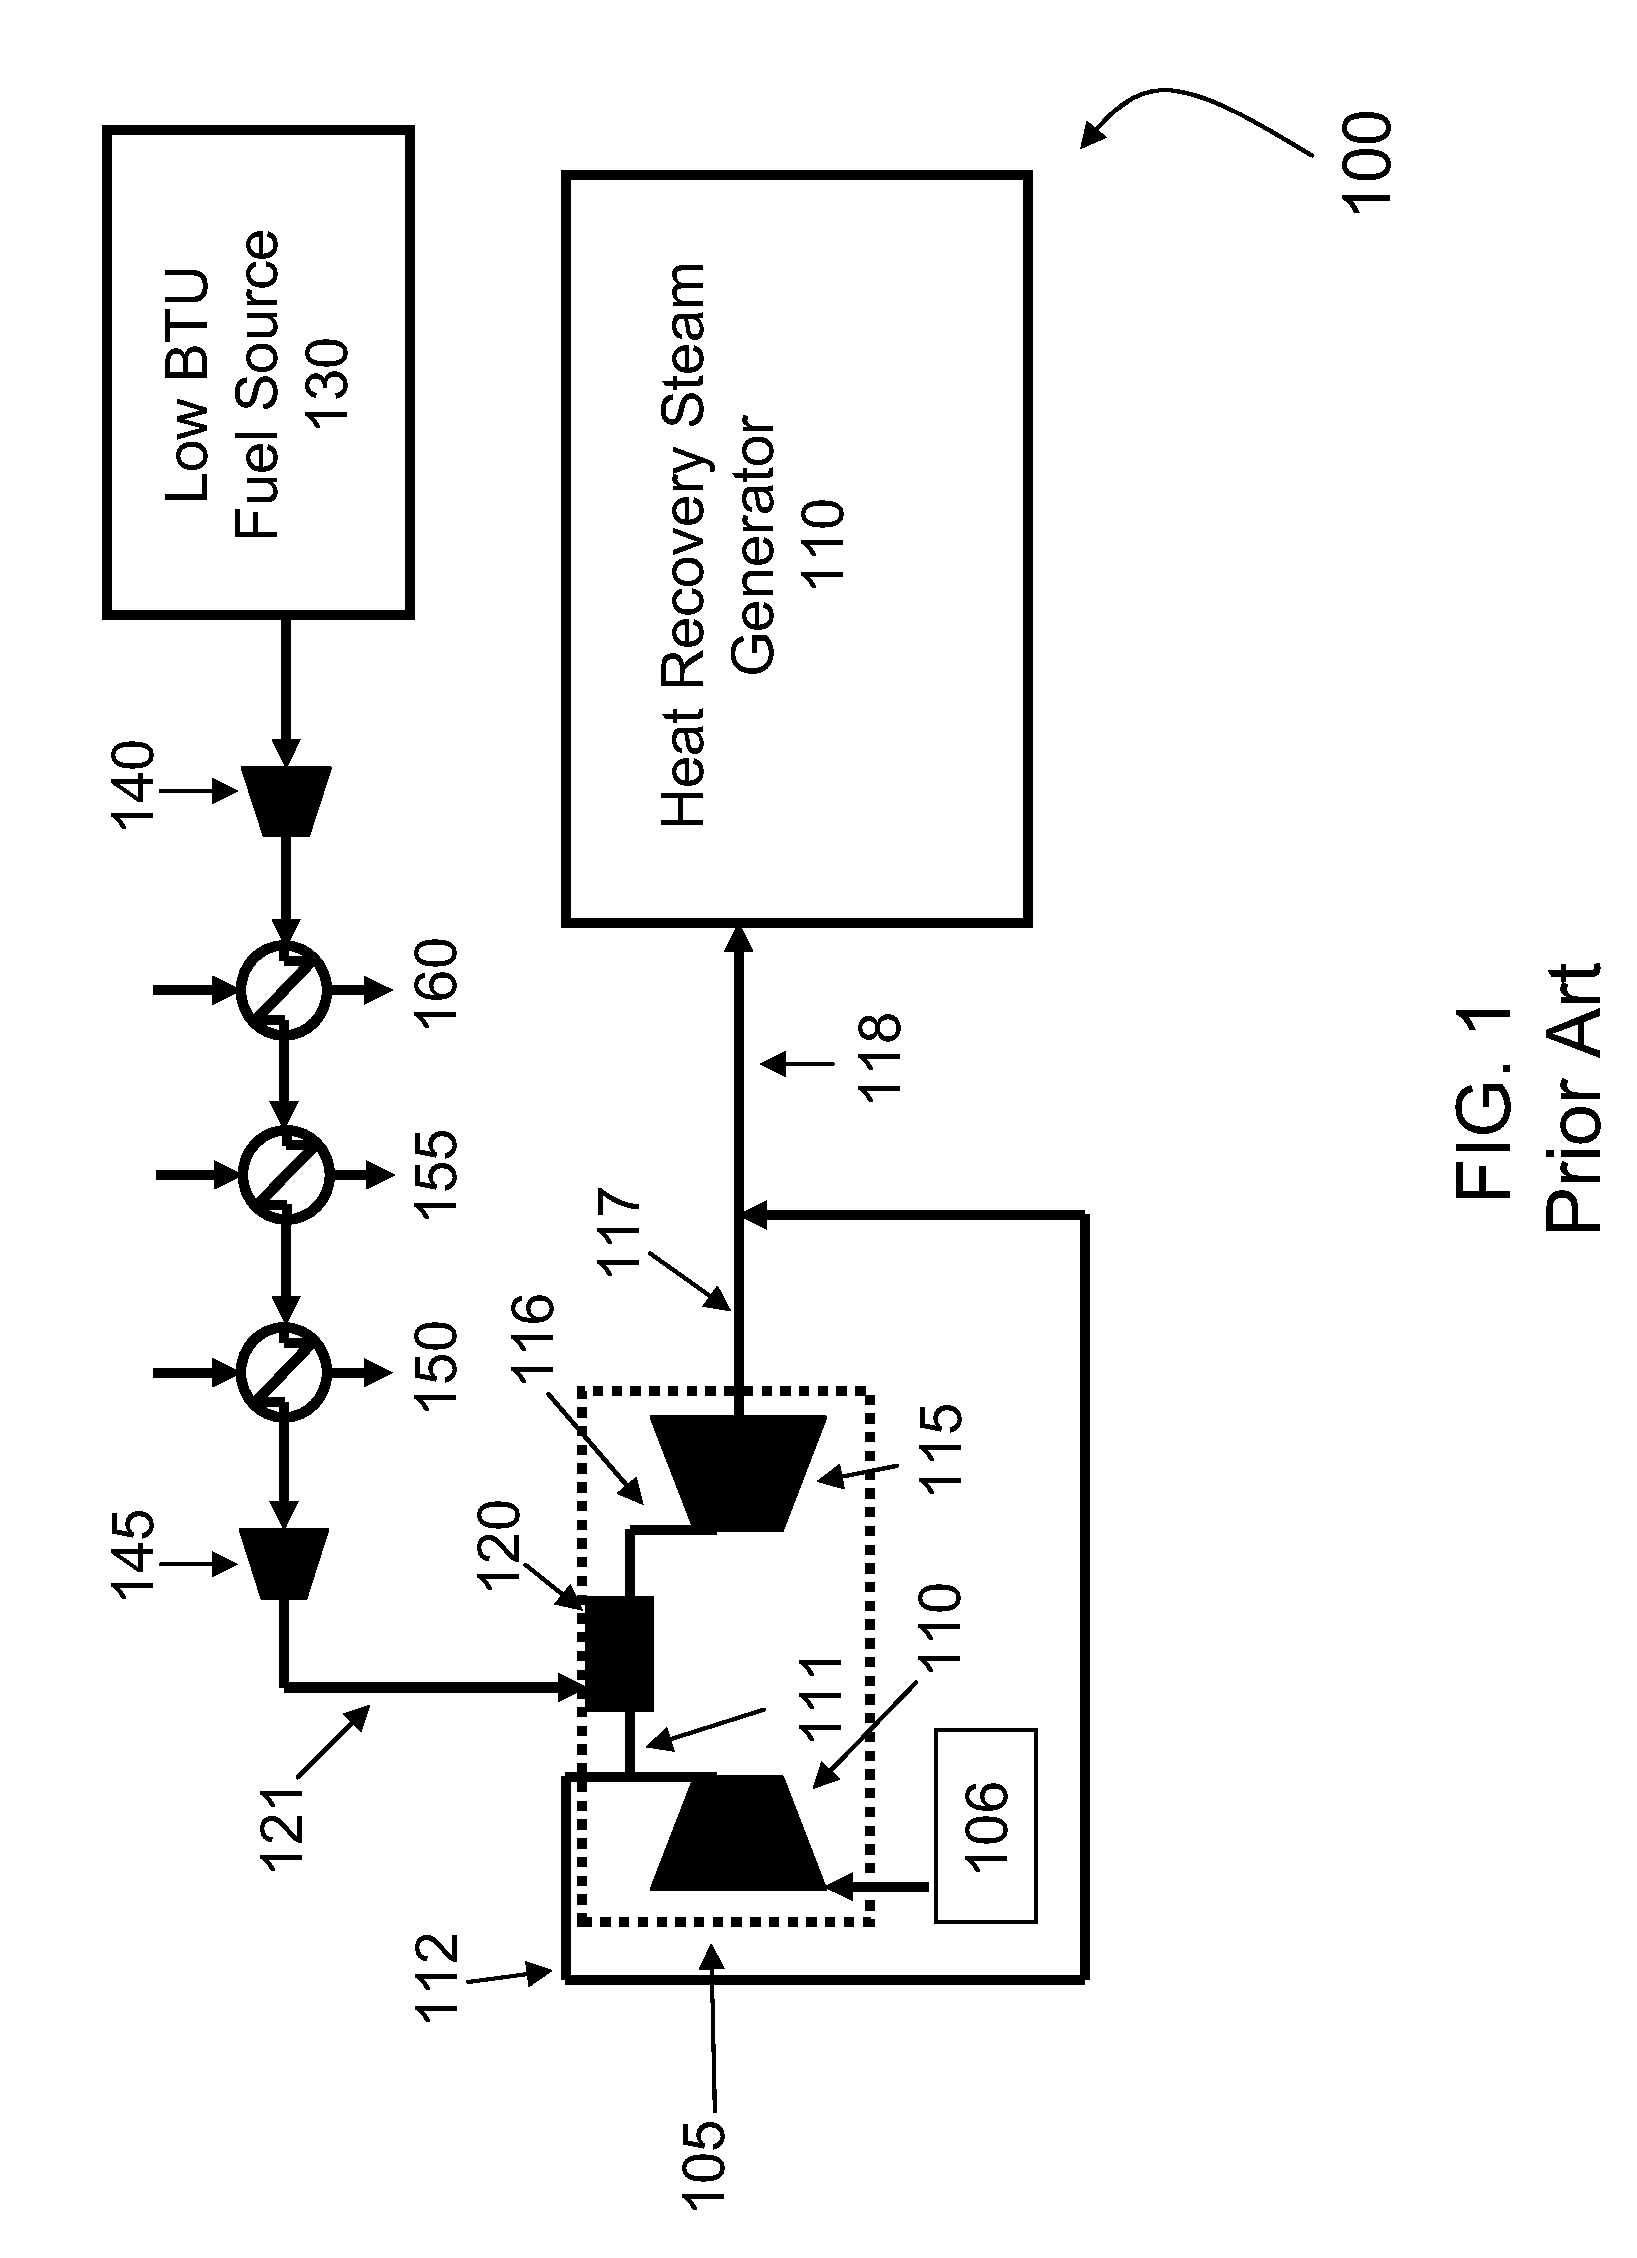 Systems, Methods, and Apparatus for Modifying Power Output and Efficiency of a Combined Cycle Power Plant